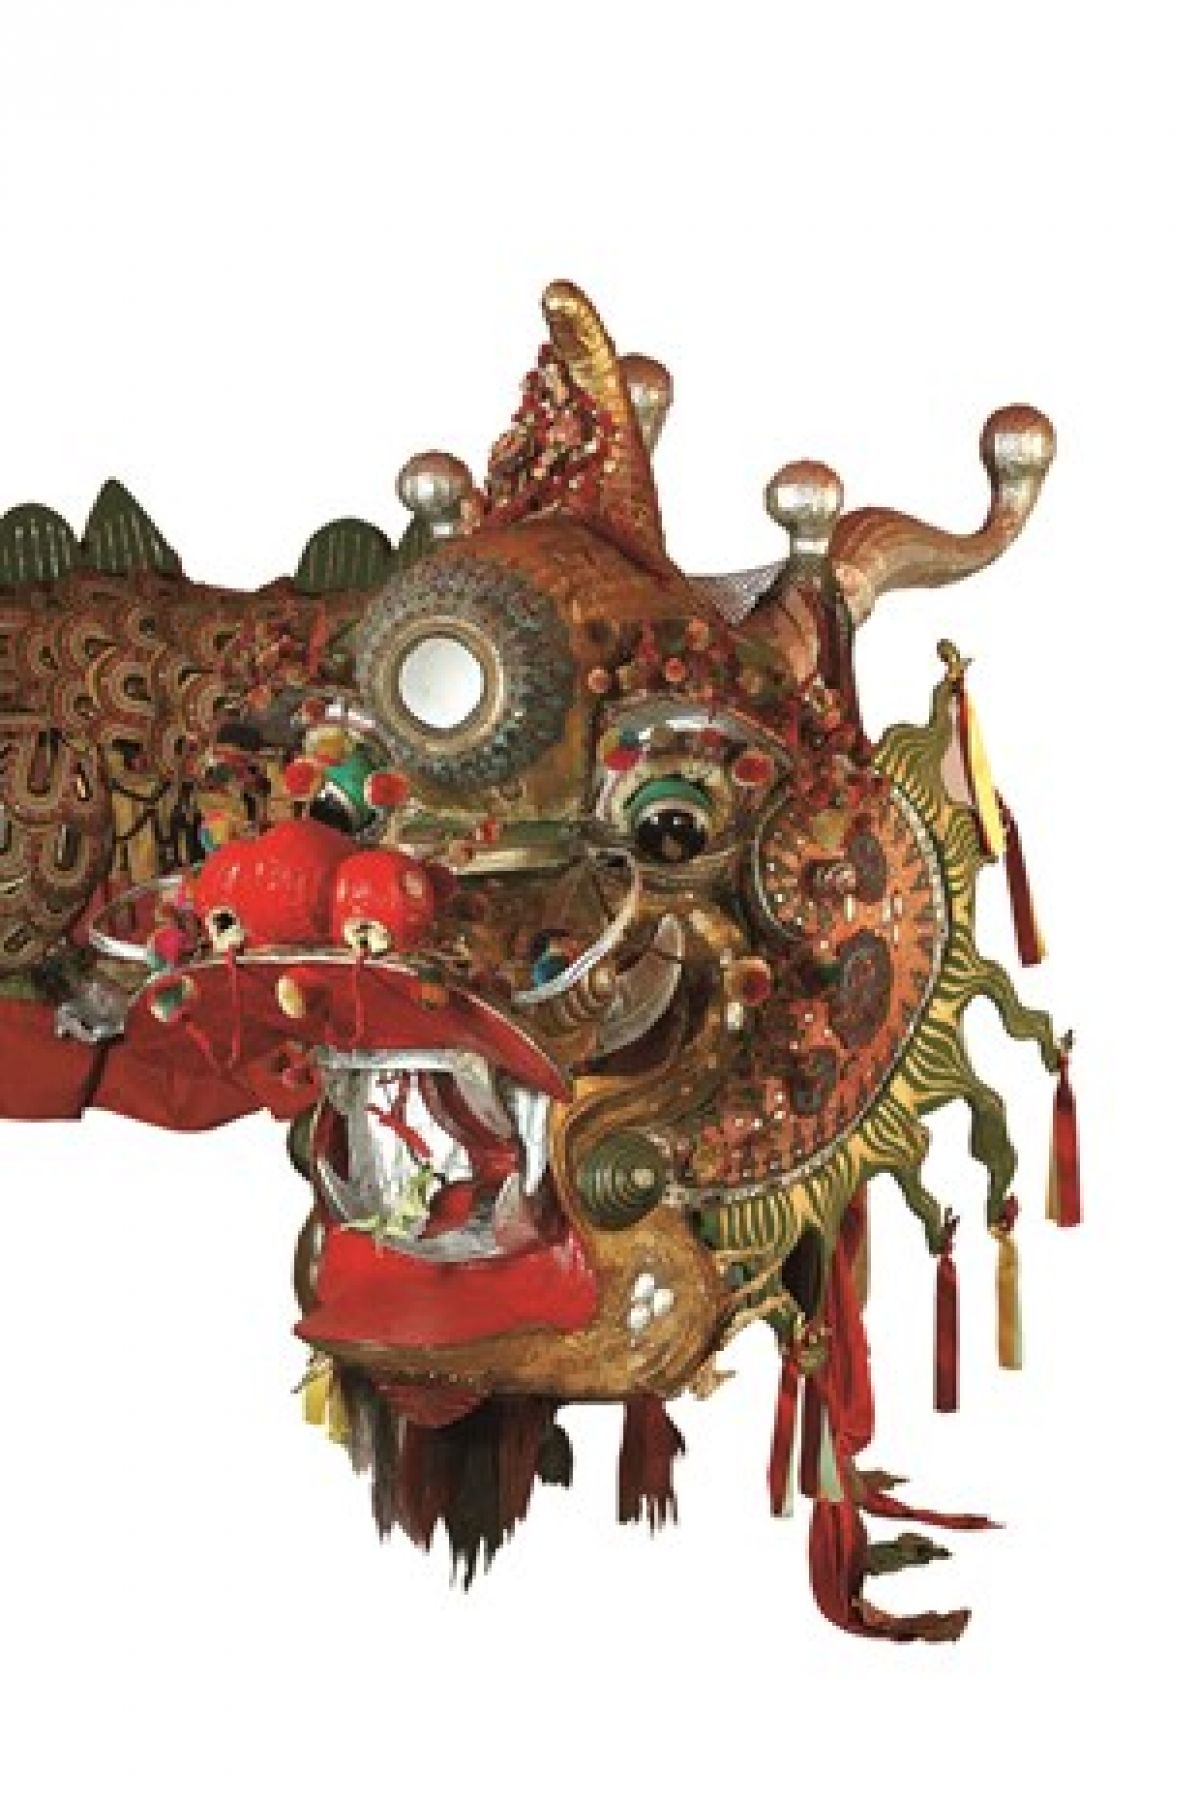 Image of the dragon Loong believed to be the oldest imperial dragon in the world